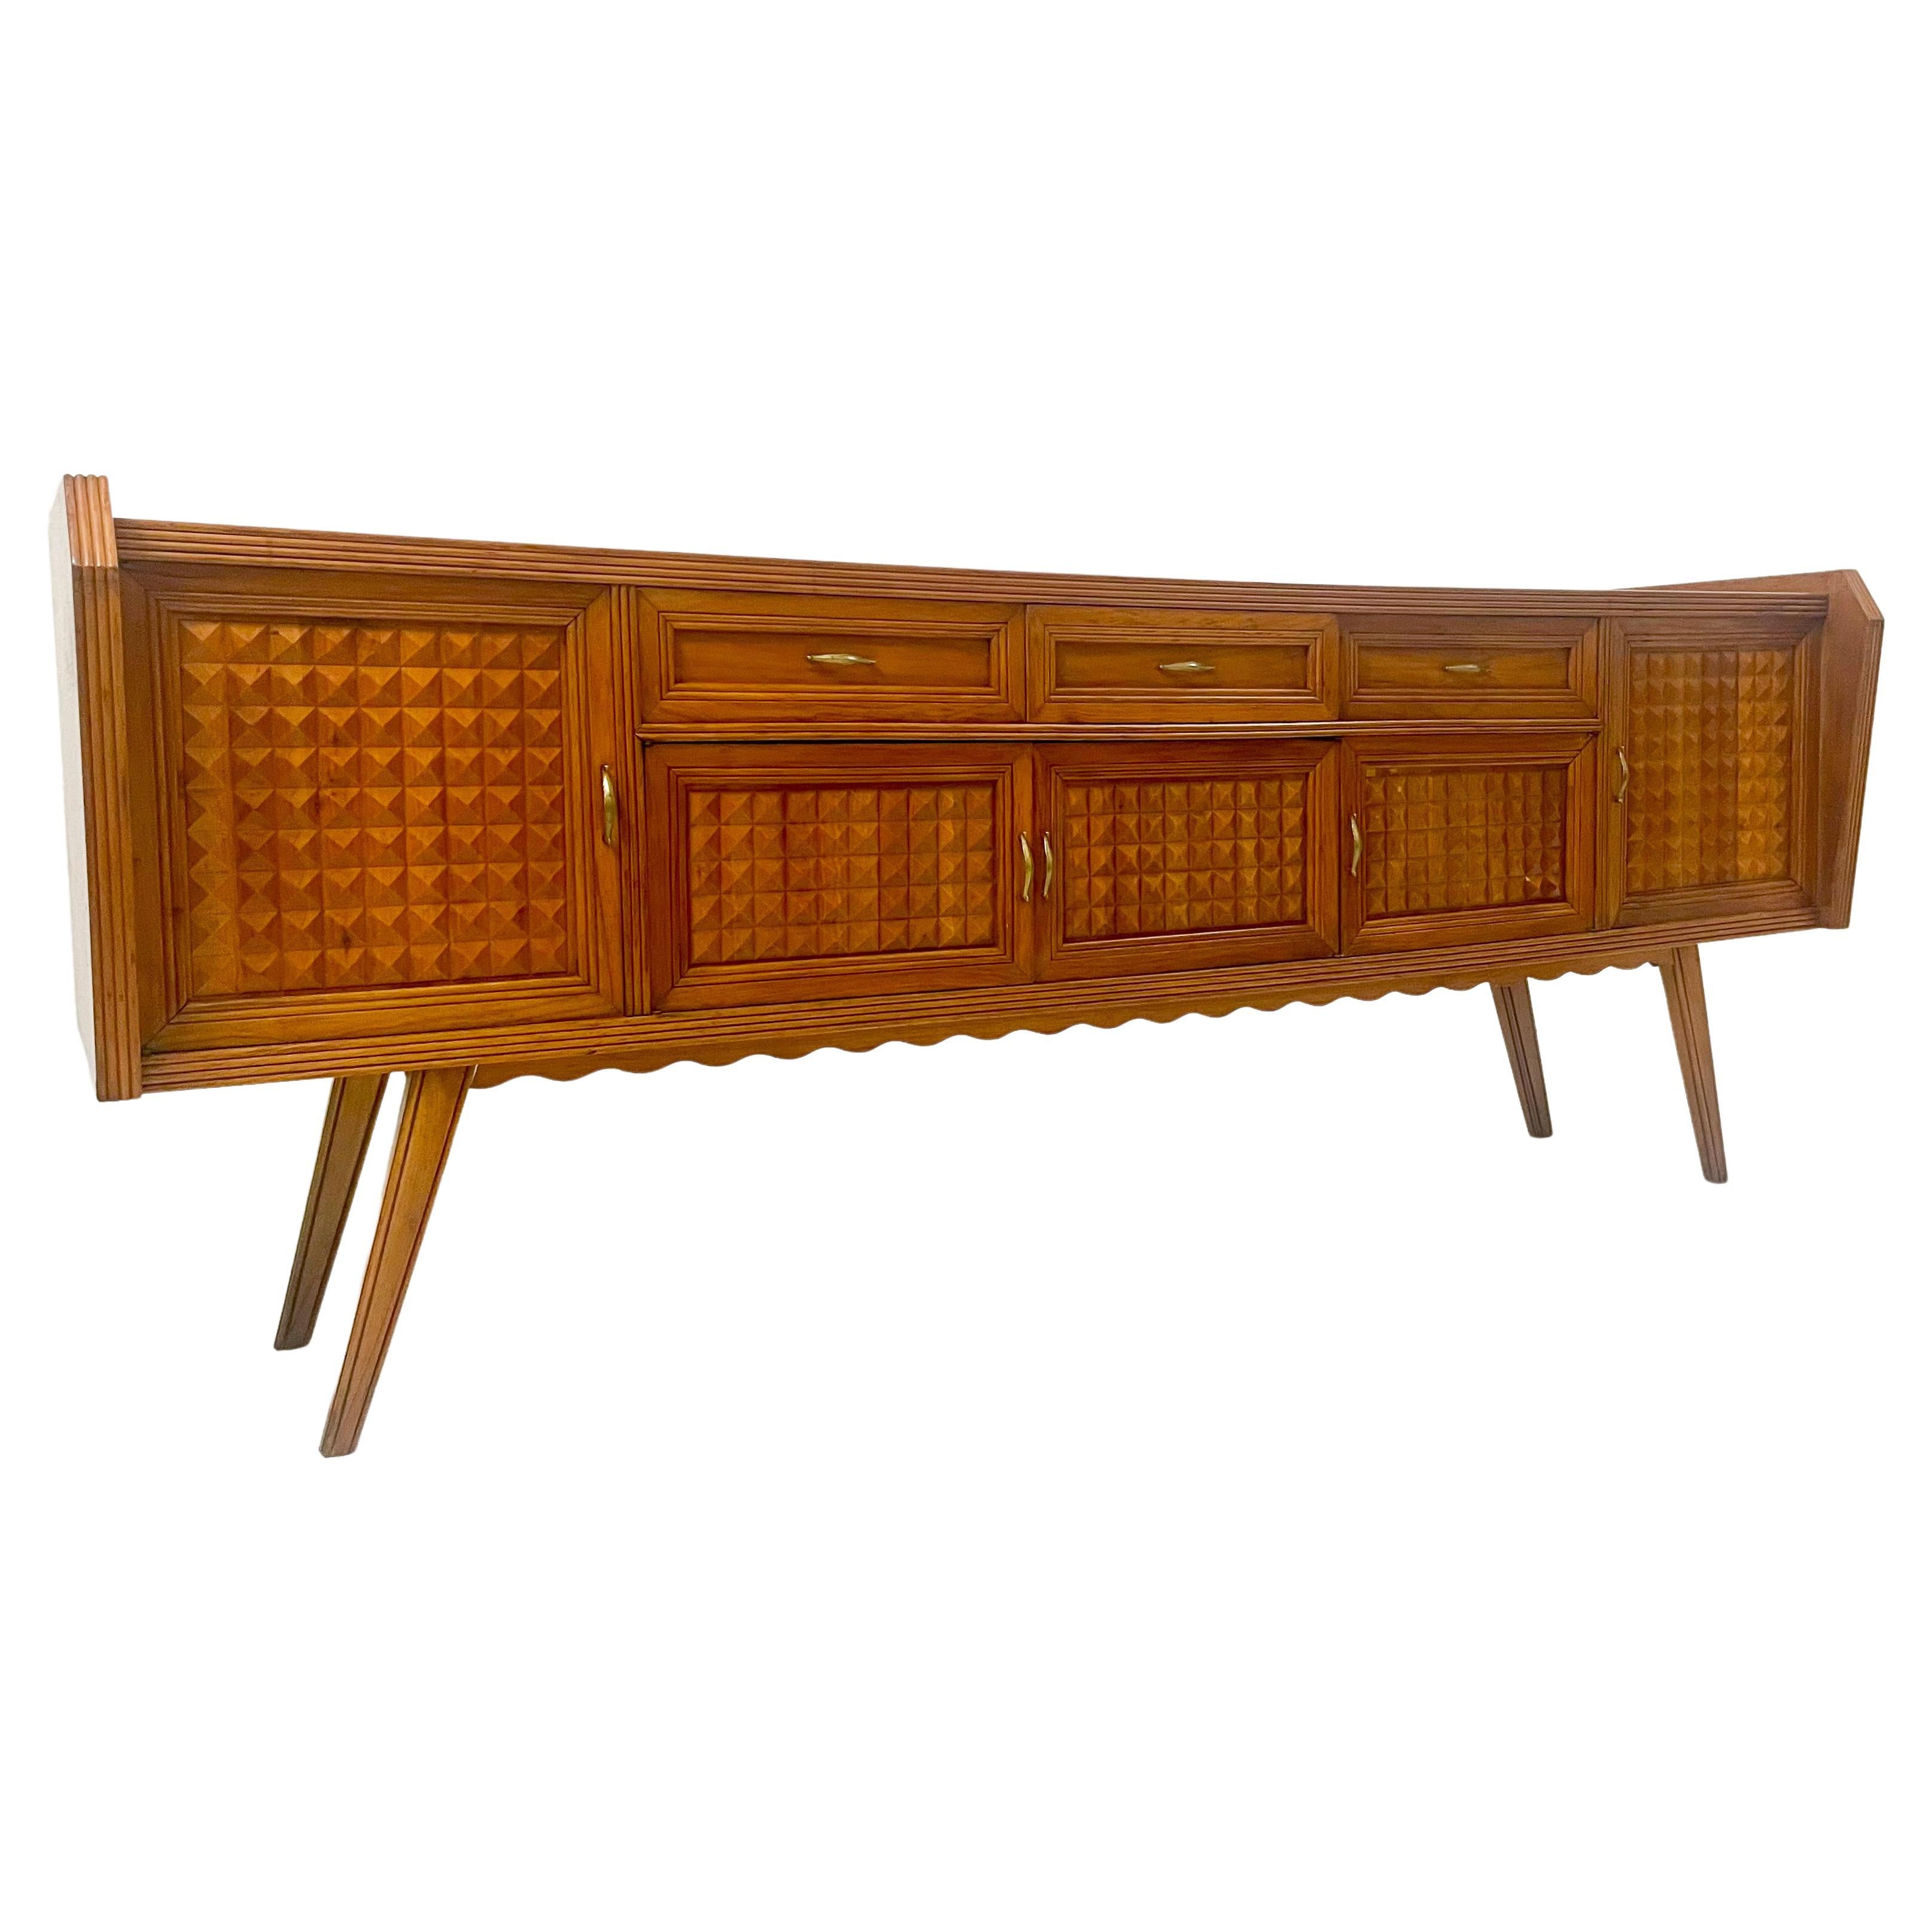 Mid-Century Modern Cherry Wood Sideboard, 1960s For Sale